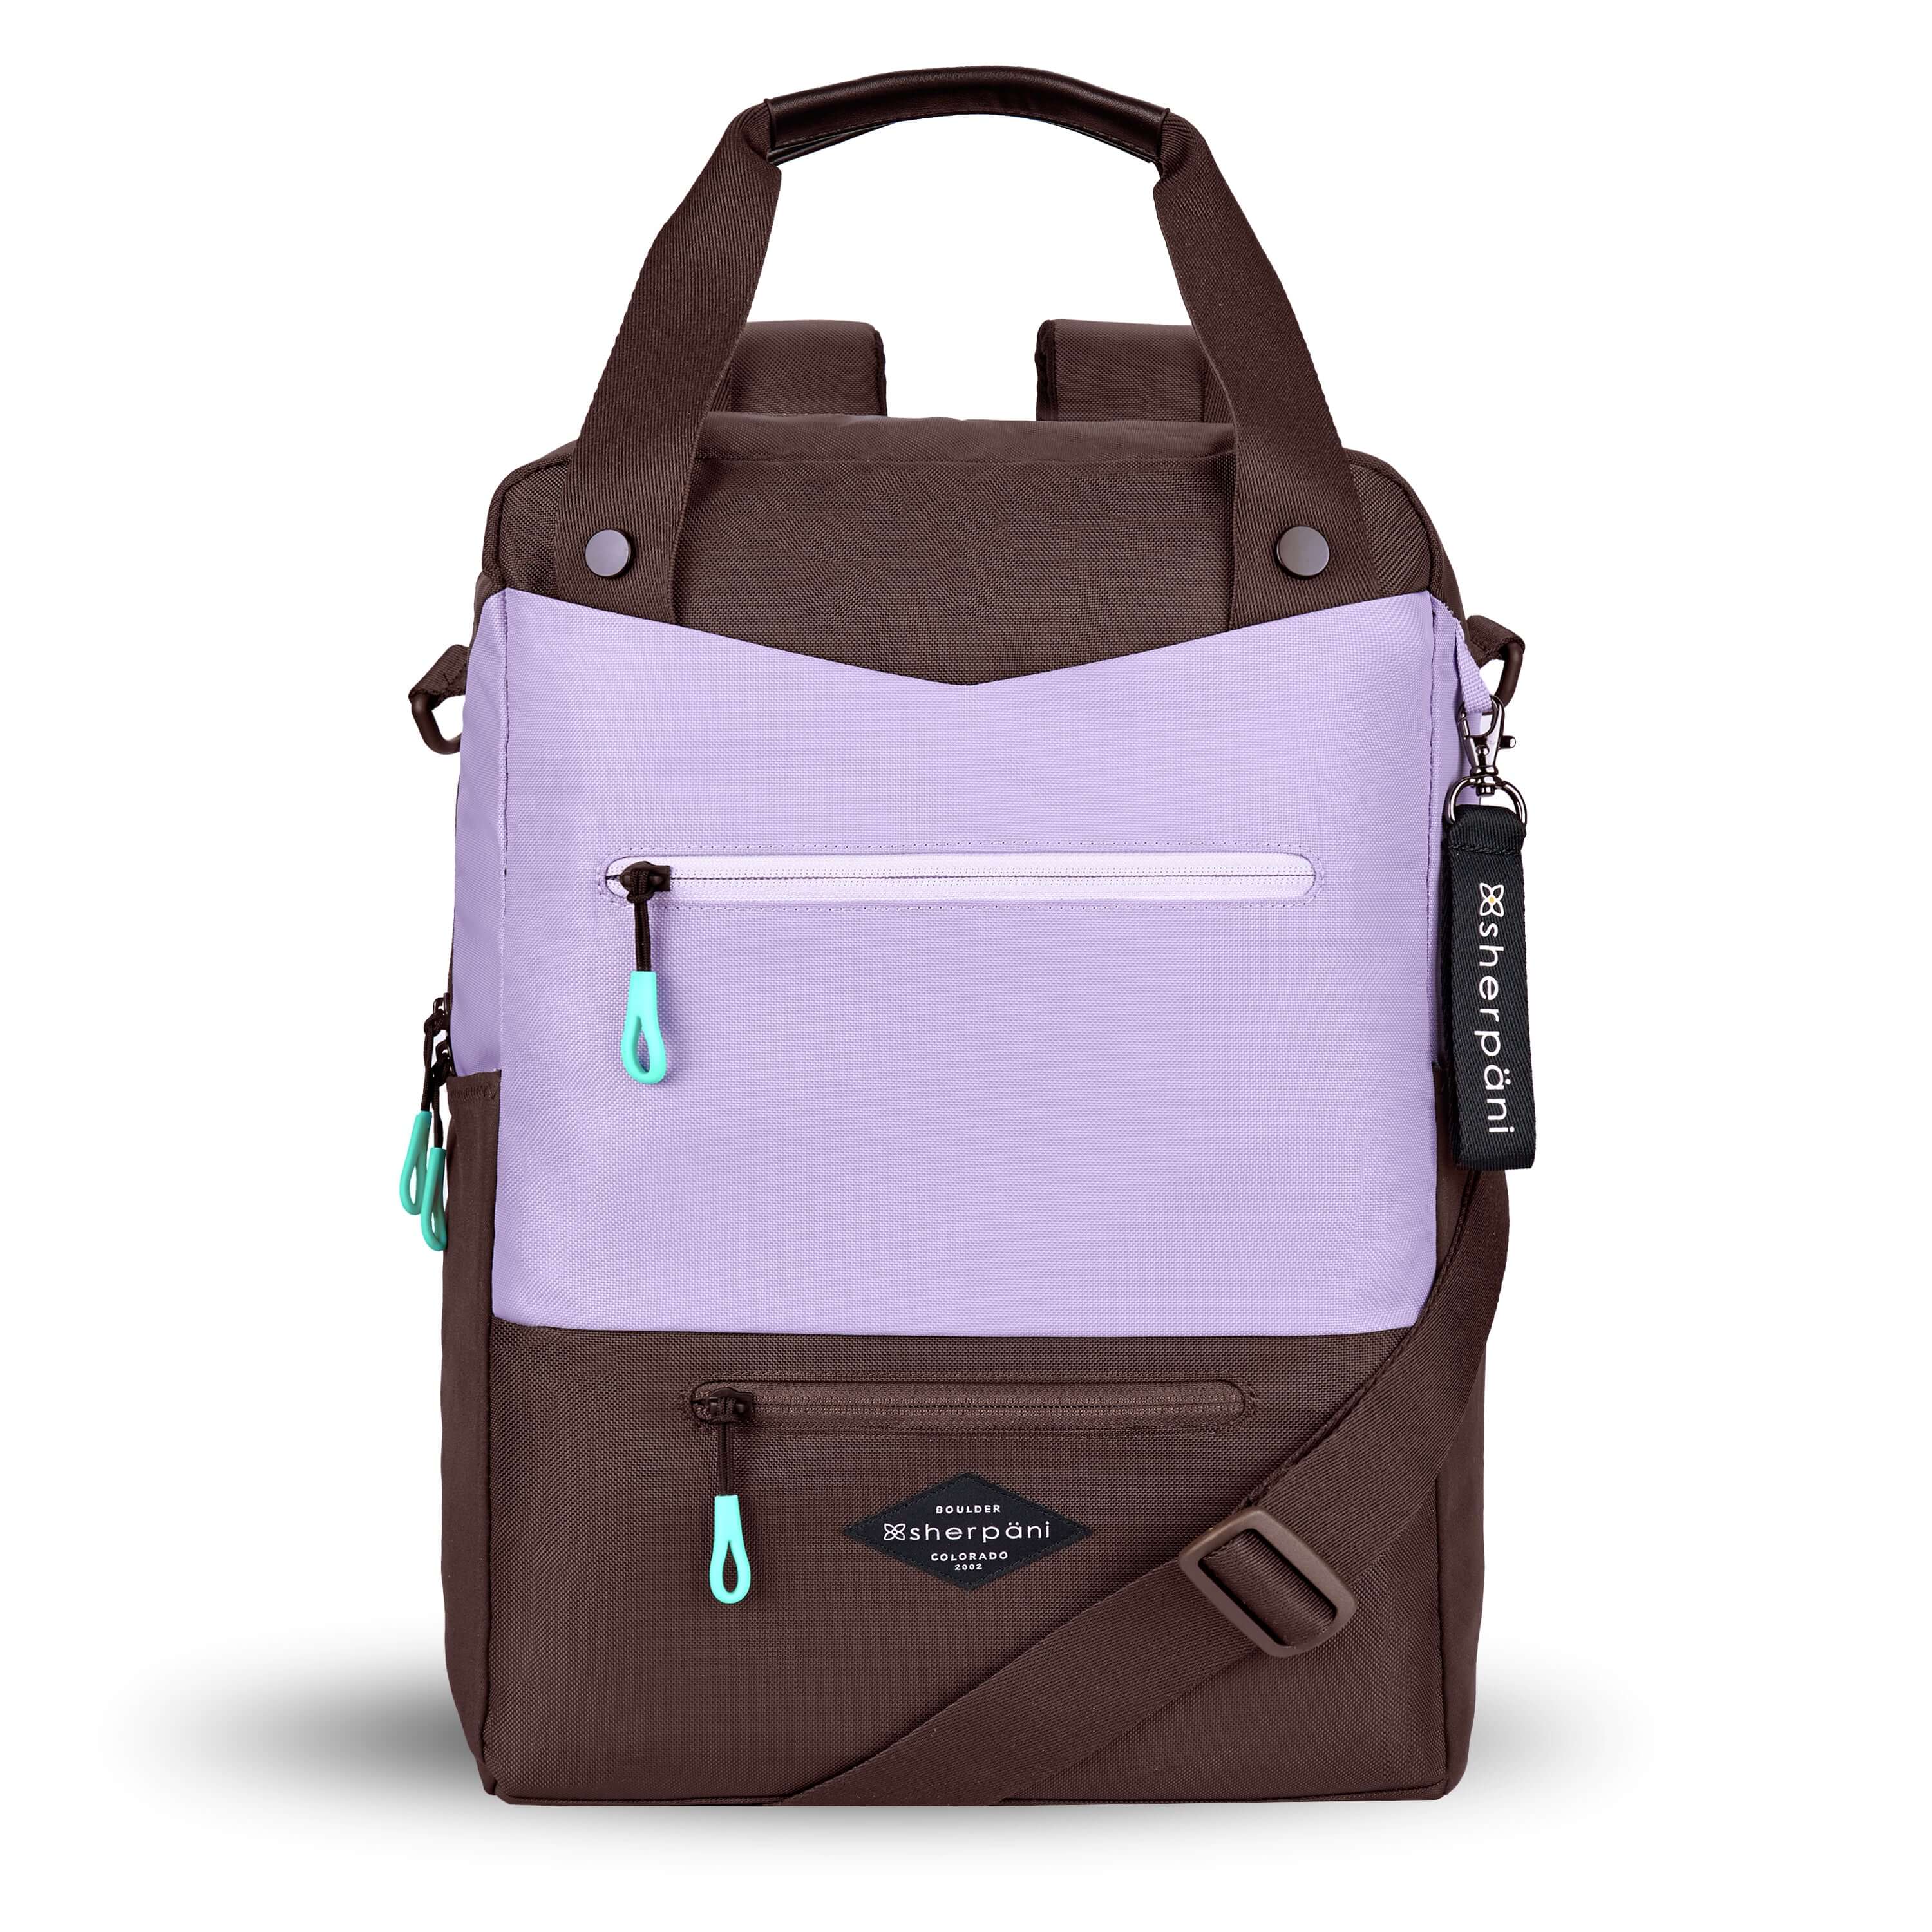 Flat front view of Sherpani&#39;s three-in-one bag, the Camden in Lavender. The bag is two-toned in lavender and brown. There are two external zipper pockets on the front panel with easy-pull zippers in aqua. A branded Sherpani keychain is clipped to the upper right corner. An elastic water bottle holder sits on either side of the bag. The bag has an adjustable/detachable crossbody strap, padded/adjustable backpack straps and short tote handles fixed at the top.